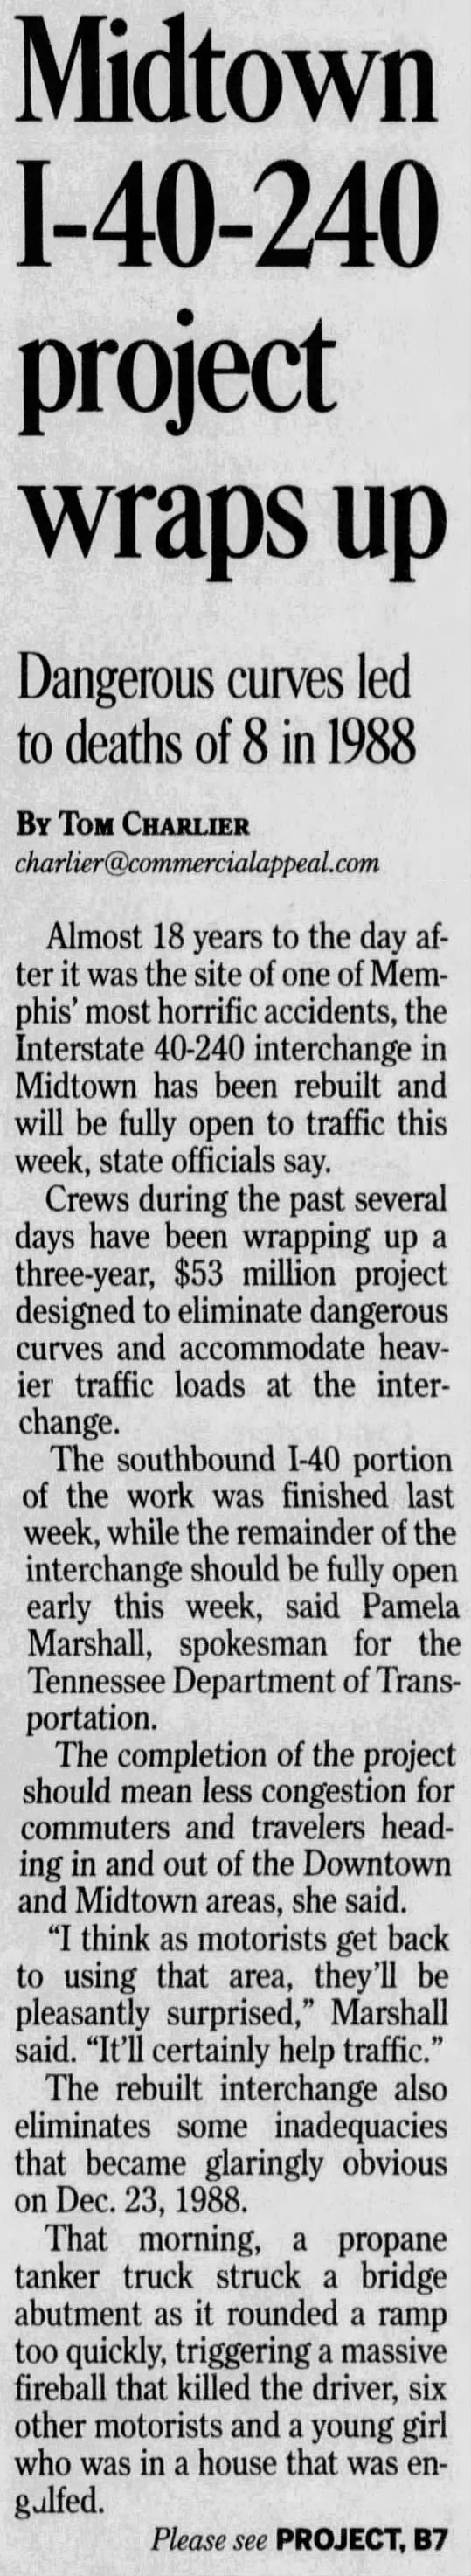 Midtown I-40-240 project wraps up